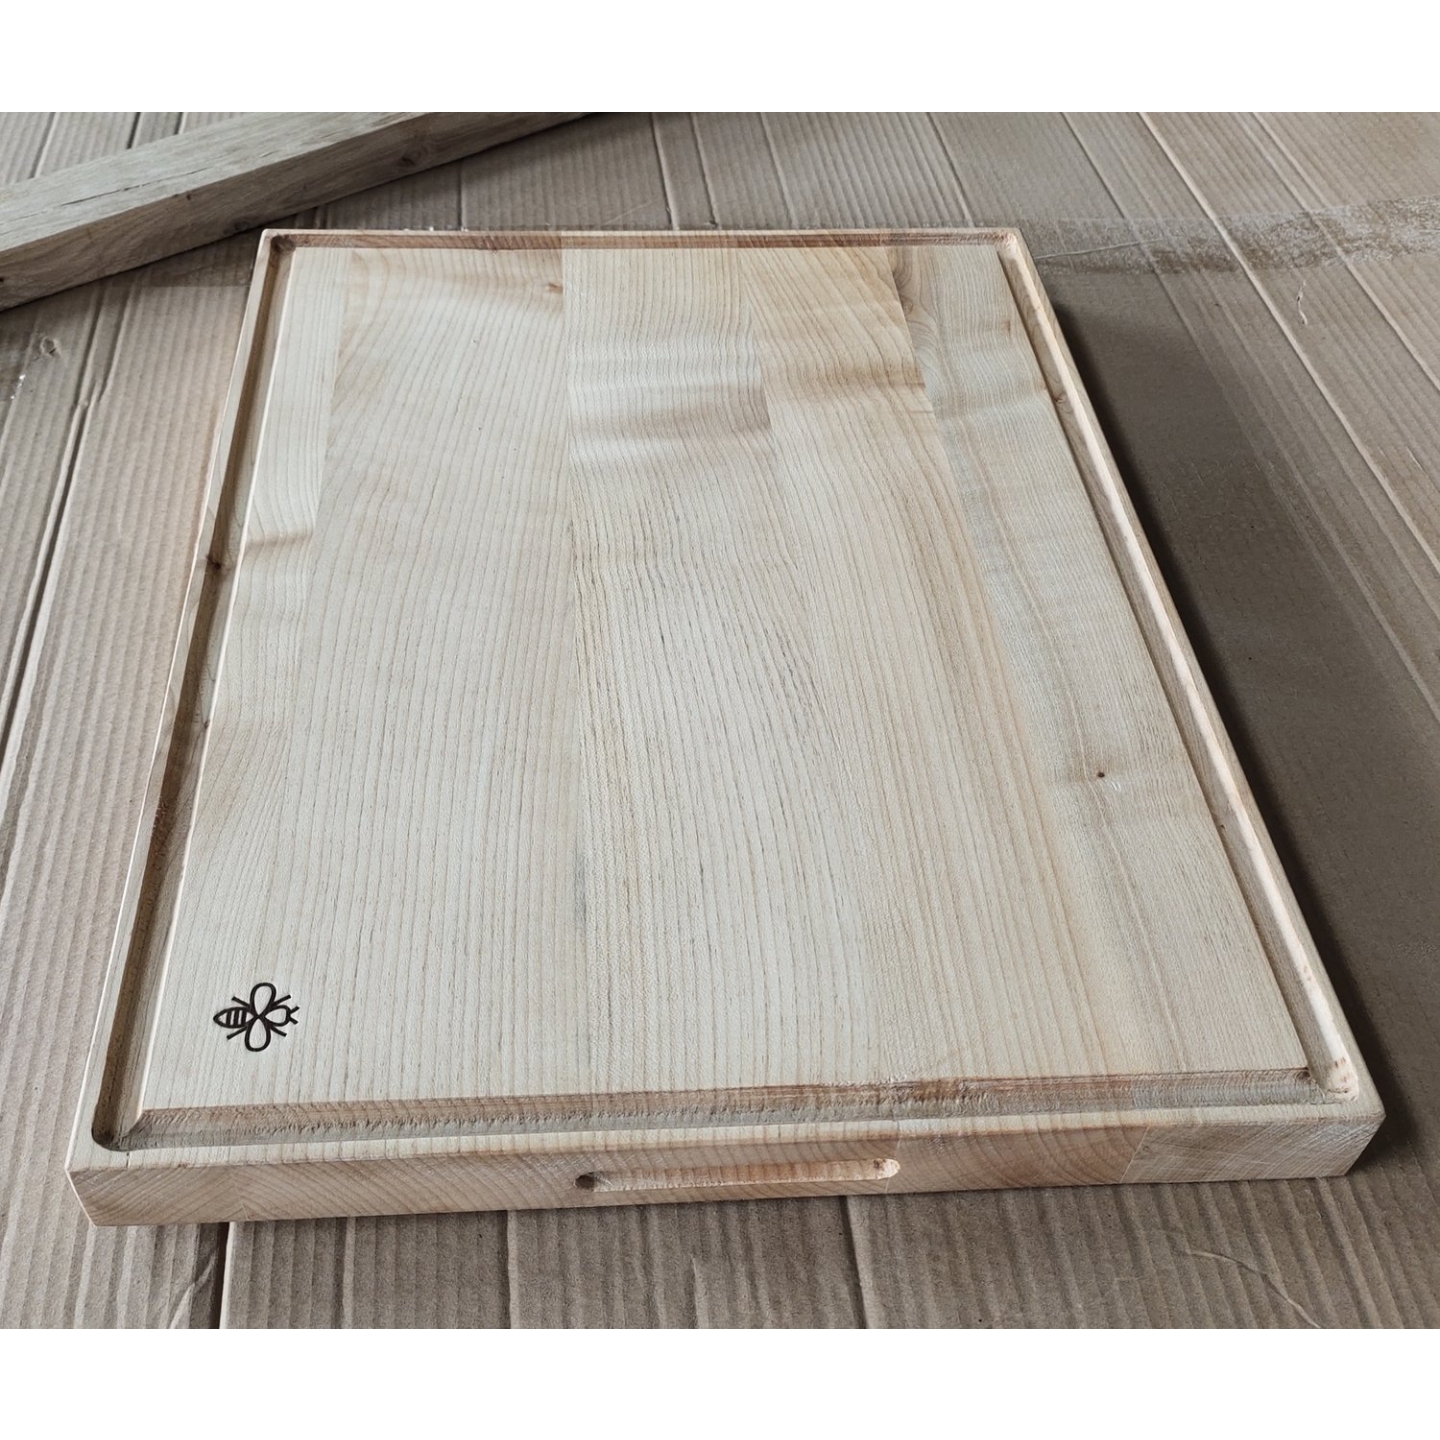 Face grian maple wood service chopping board with juice groove